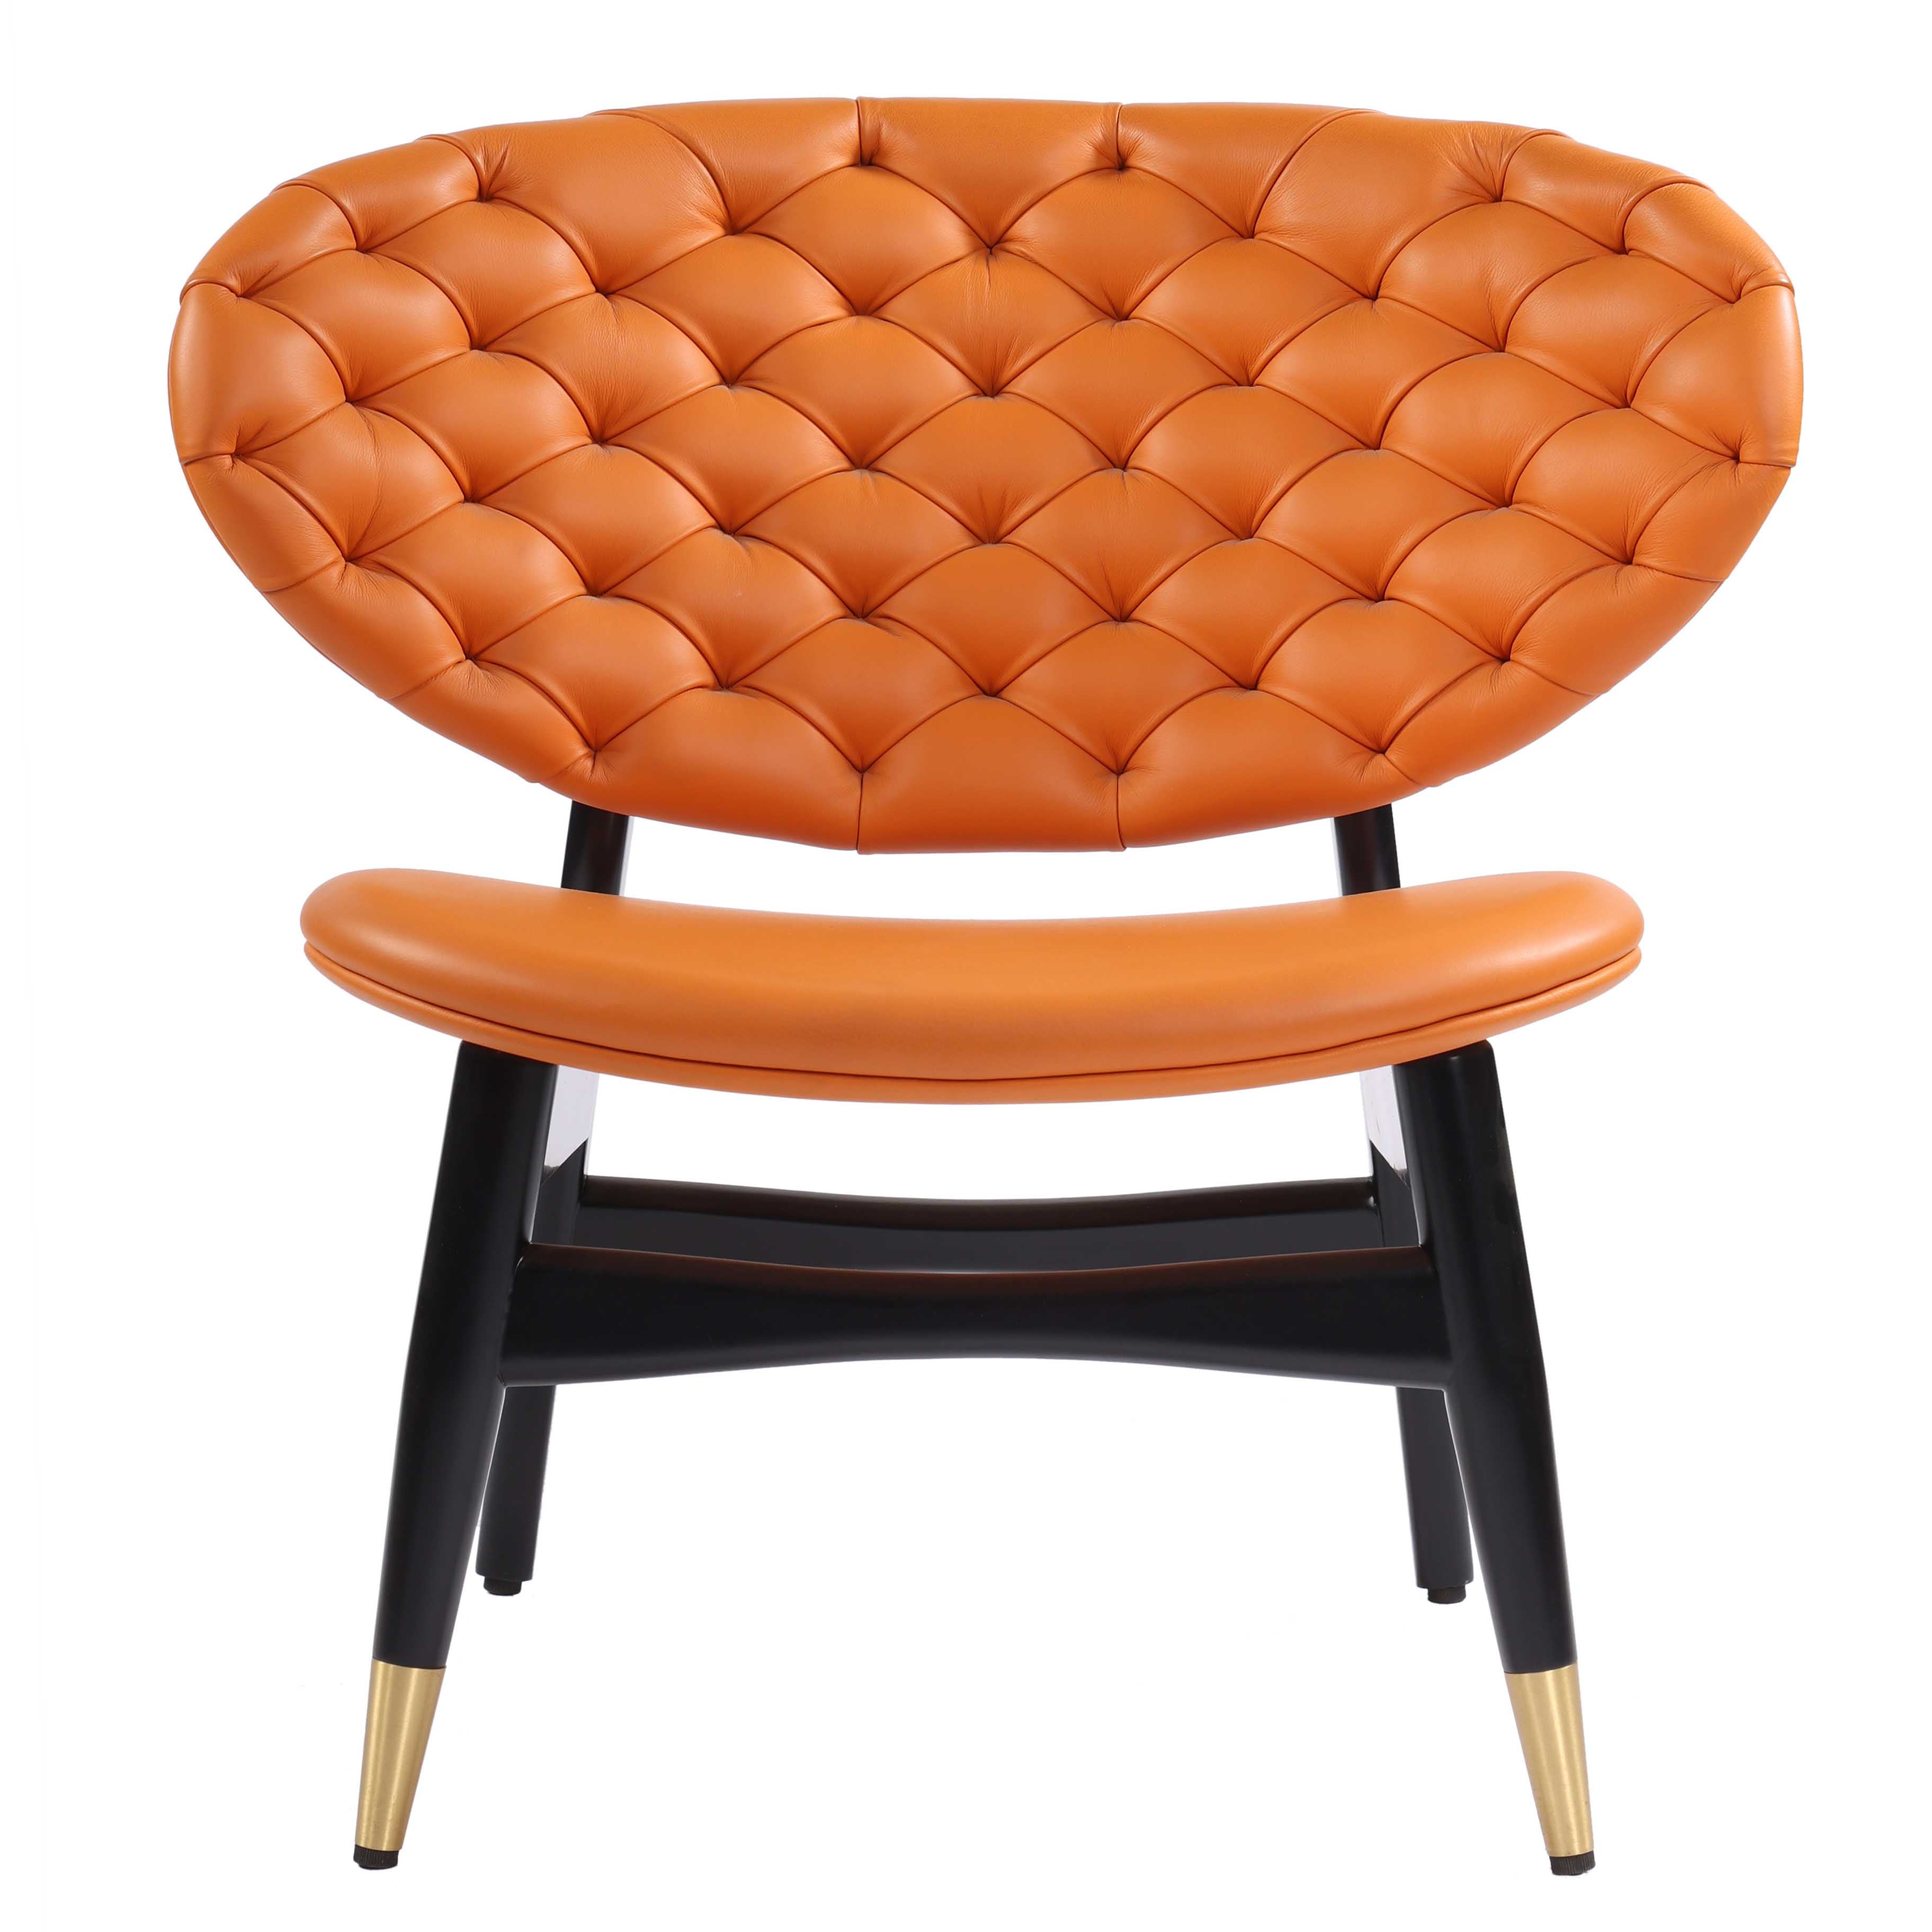 Summer Lounge Chair PU Leather Upholstered with Wooden Legs - Orange